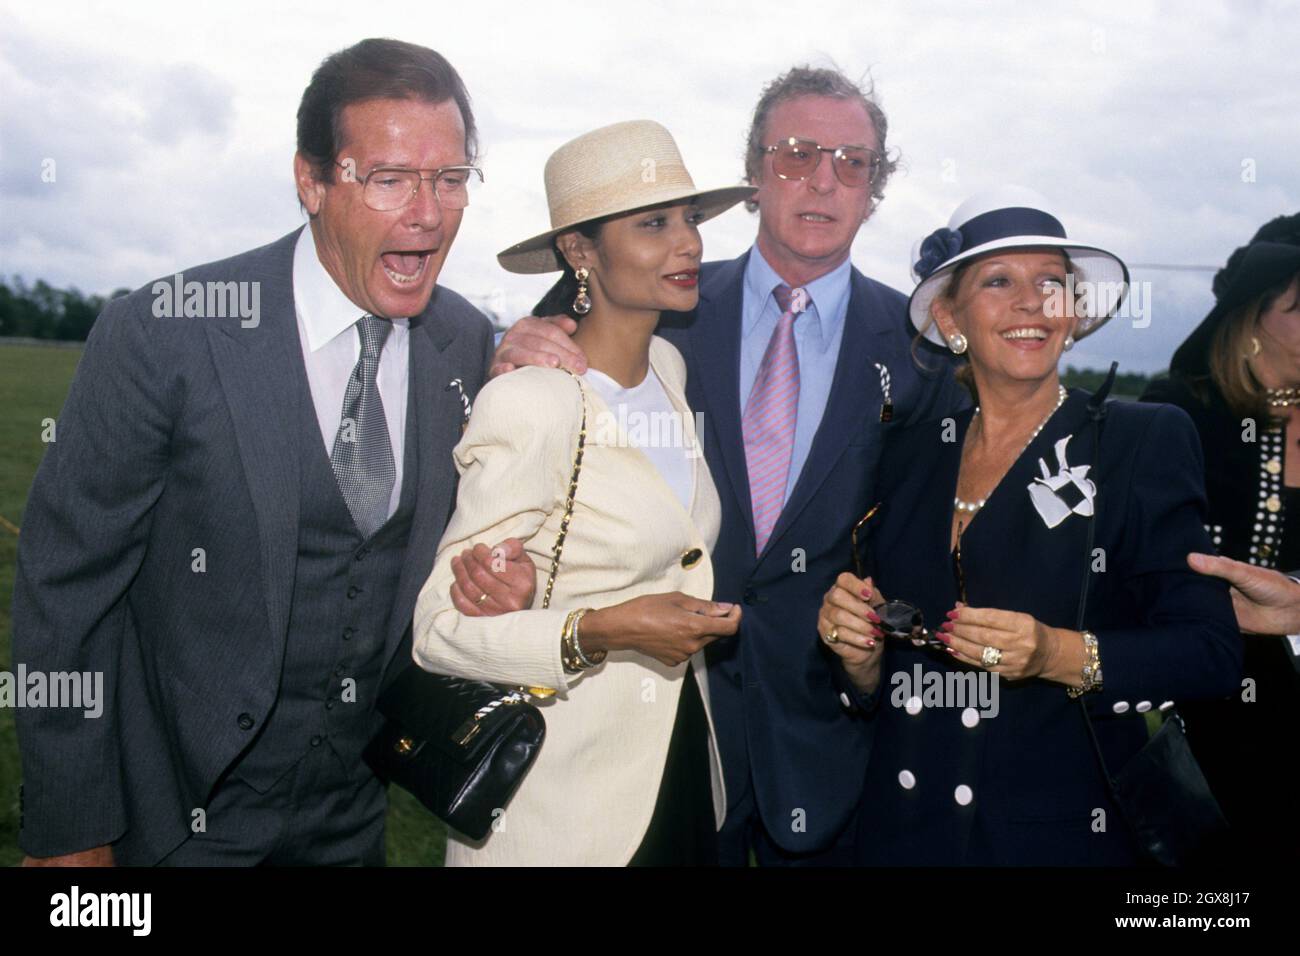 Roger Moore with Michael Caine and their partners Shakira Caine (r) and Luisa Mattioli (r). Stock Photo